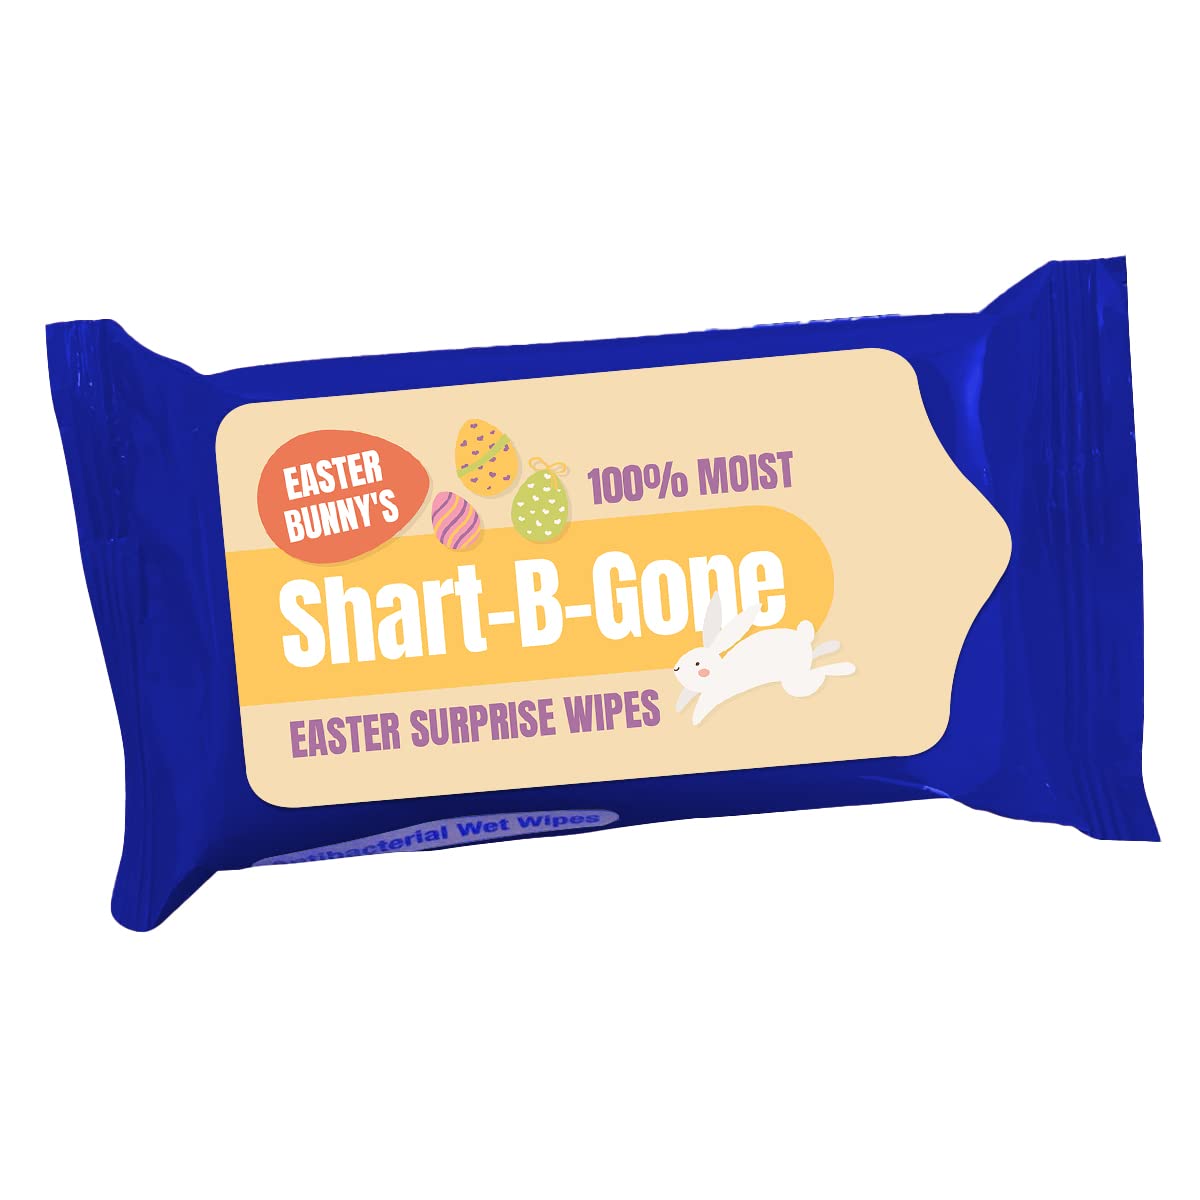 Easter Bunny Shart B Gone Moist Wipes - Funny Teen Gift Basket Ideas Travel Pocket Sized Sharted Wipes Disposable Towelettes Gears Out